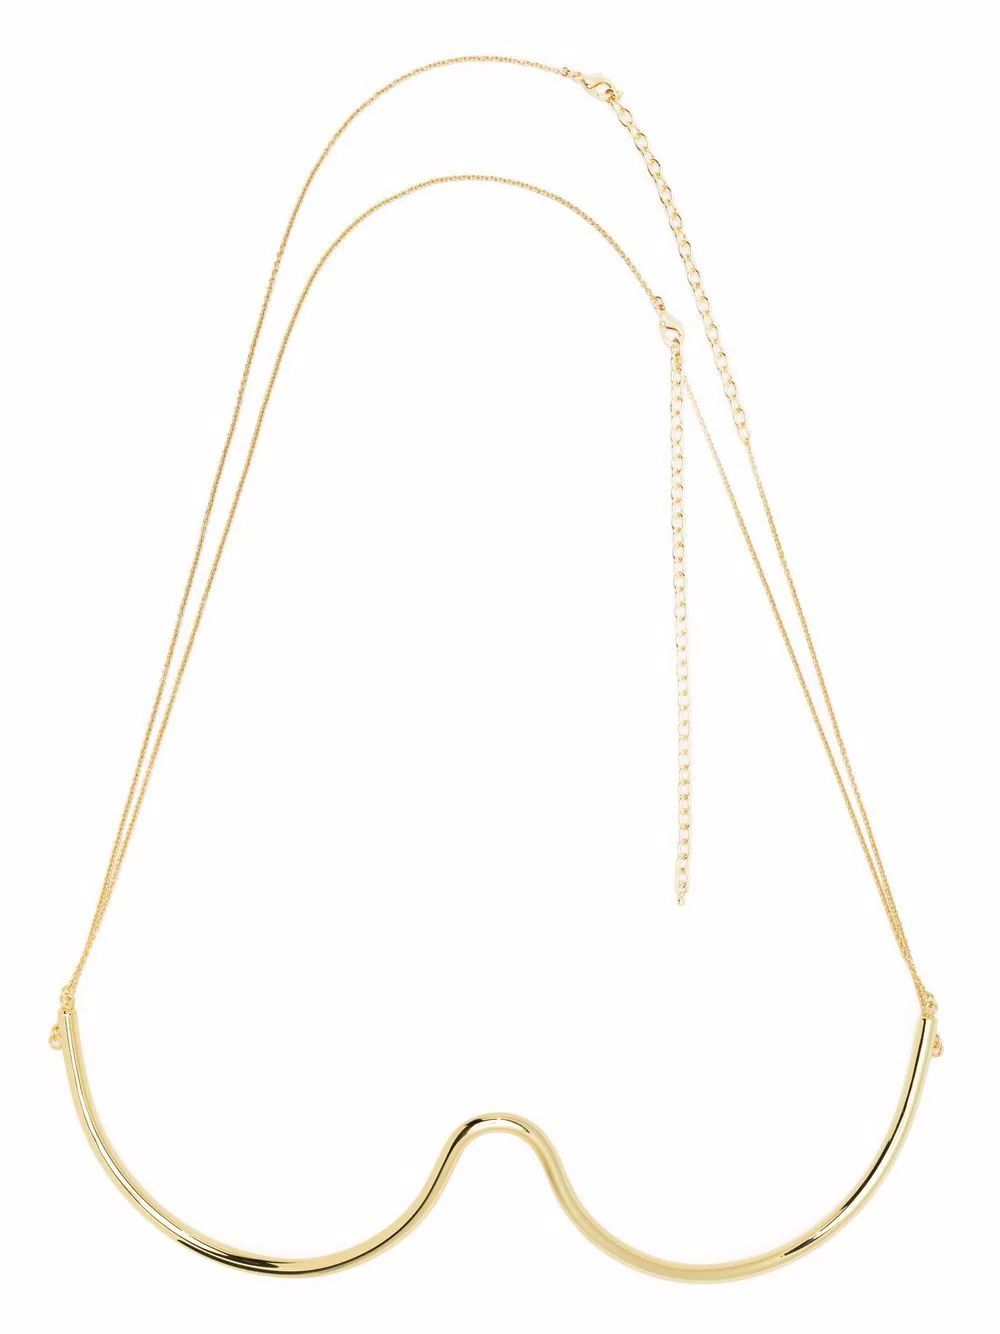 Cult Gaiabra-cup chain necklace$392Import duties included | Farfetch Global